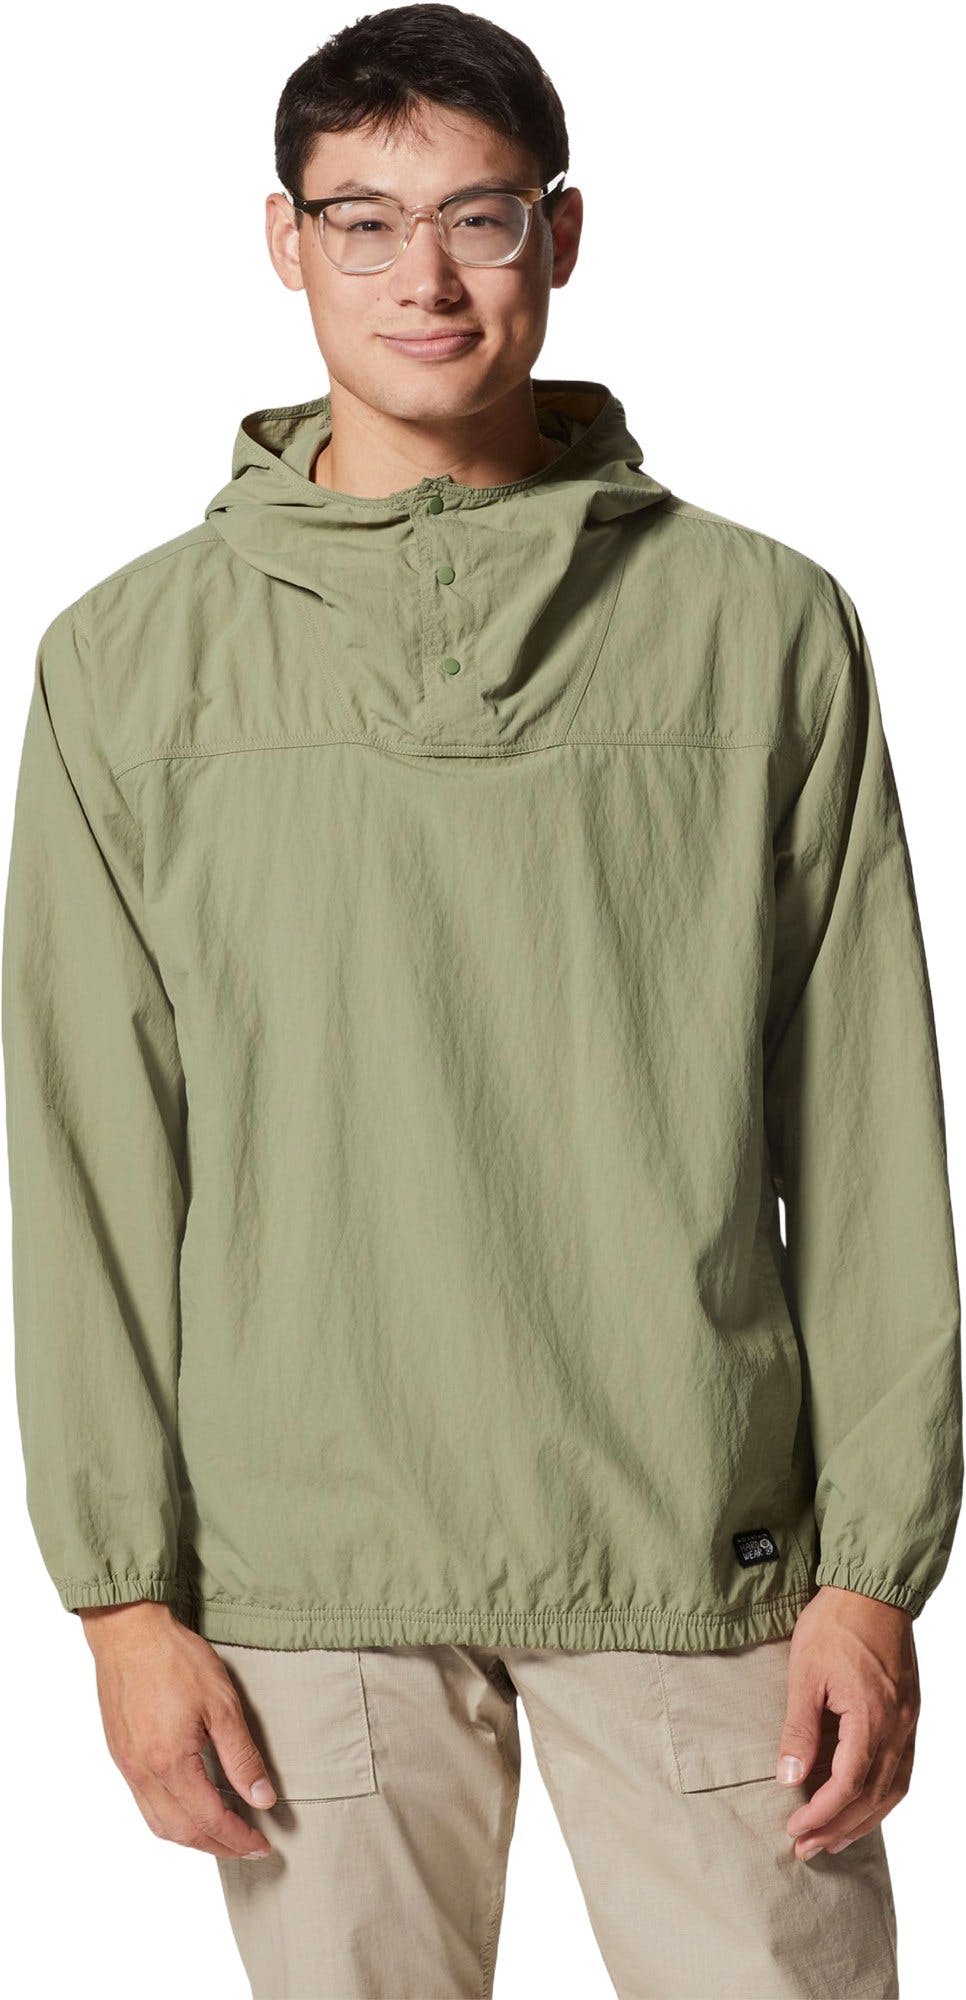 Product image for Stryder Anorak - Men's